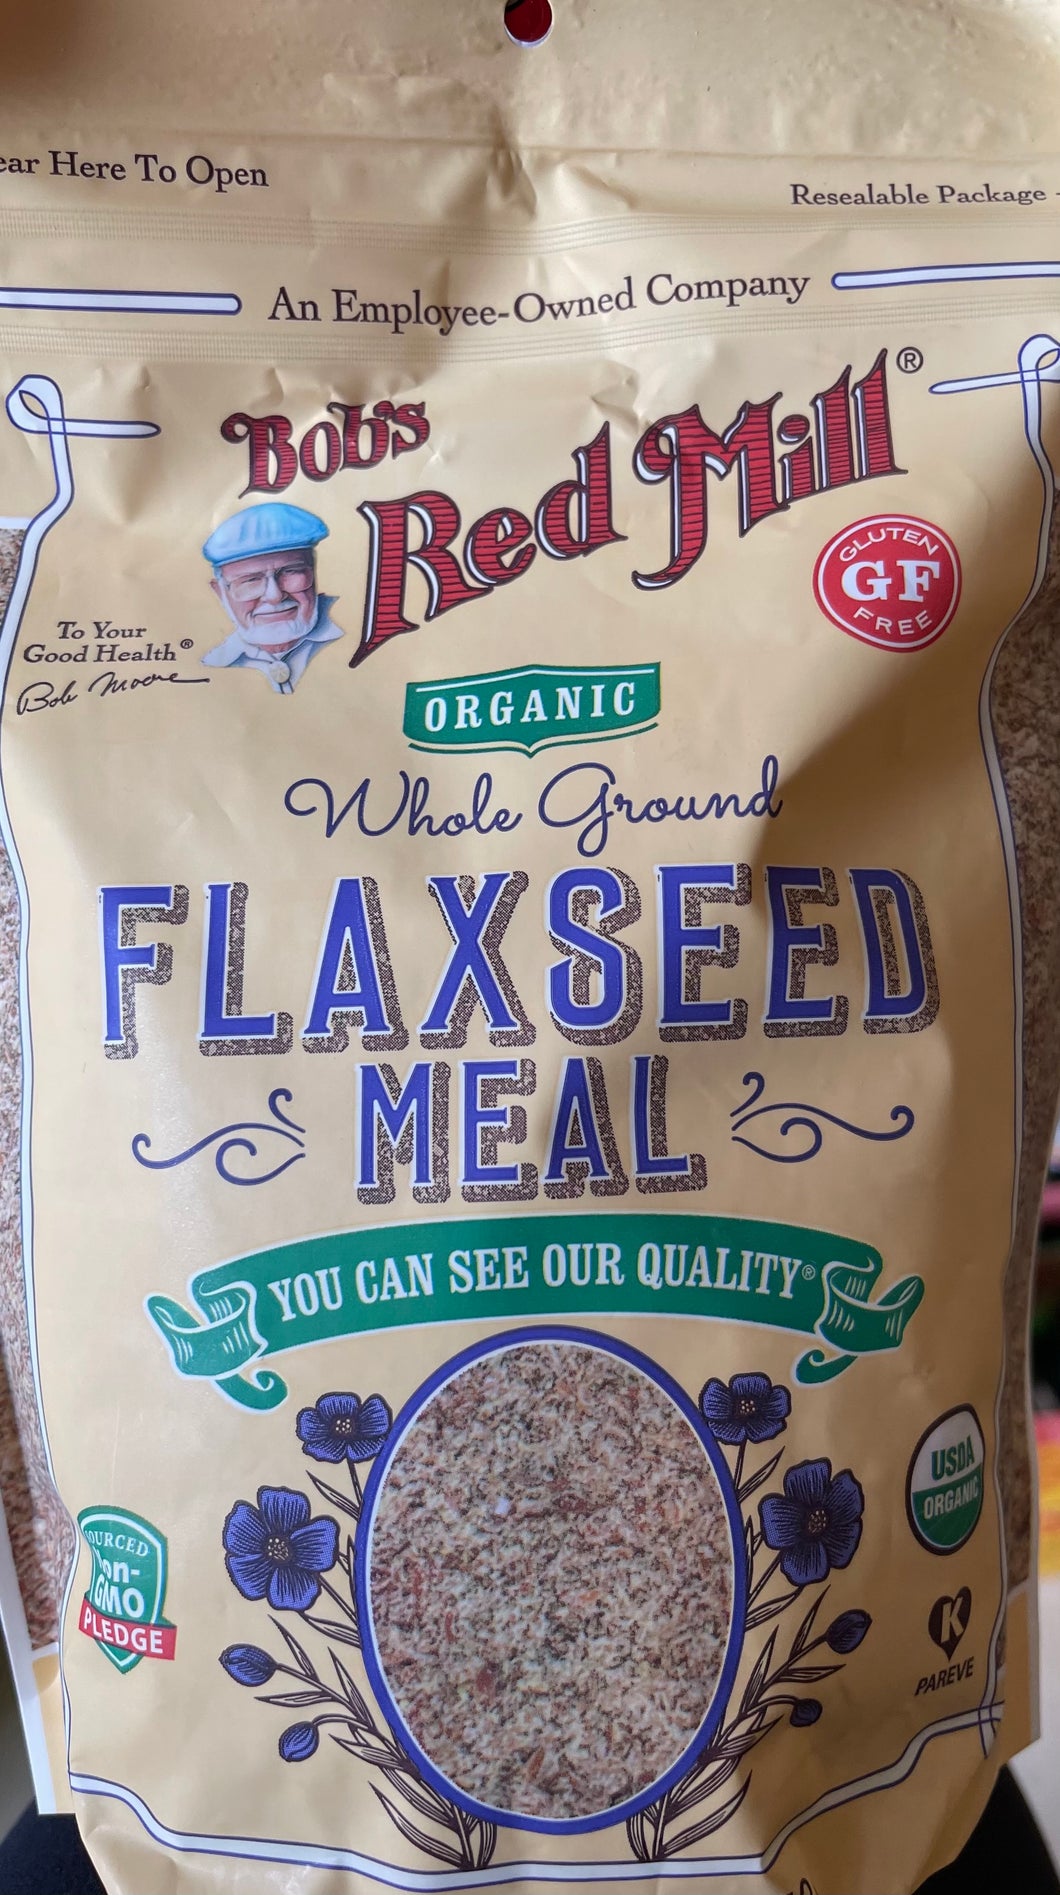 Flaxseed meal, Bobs Red Mill, Organic